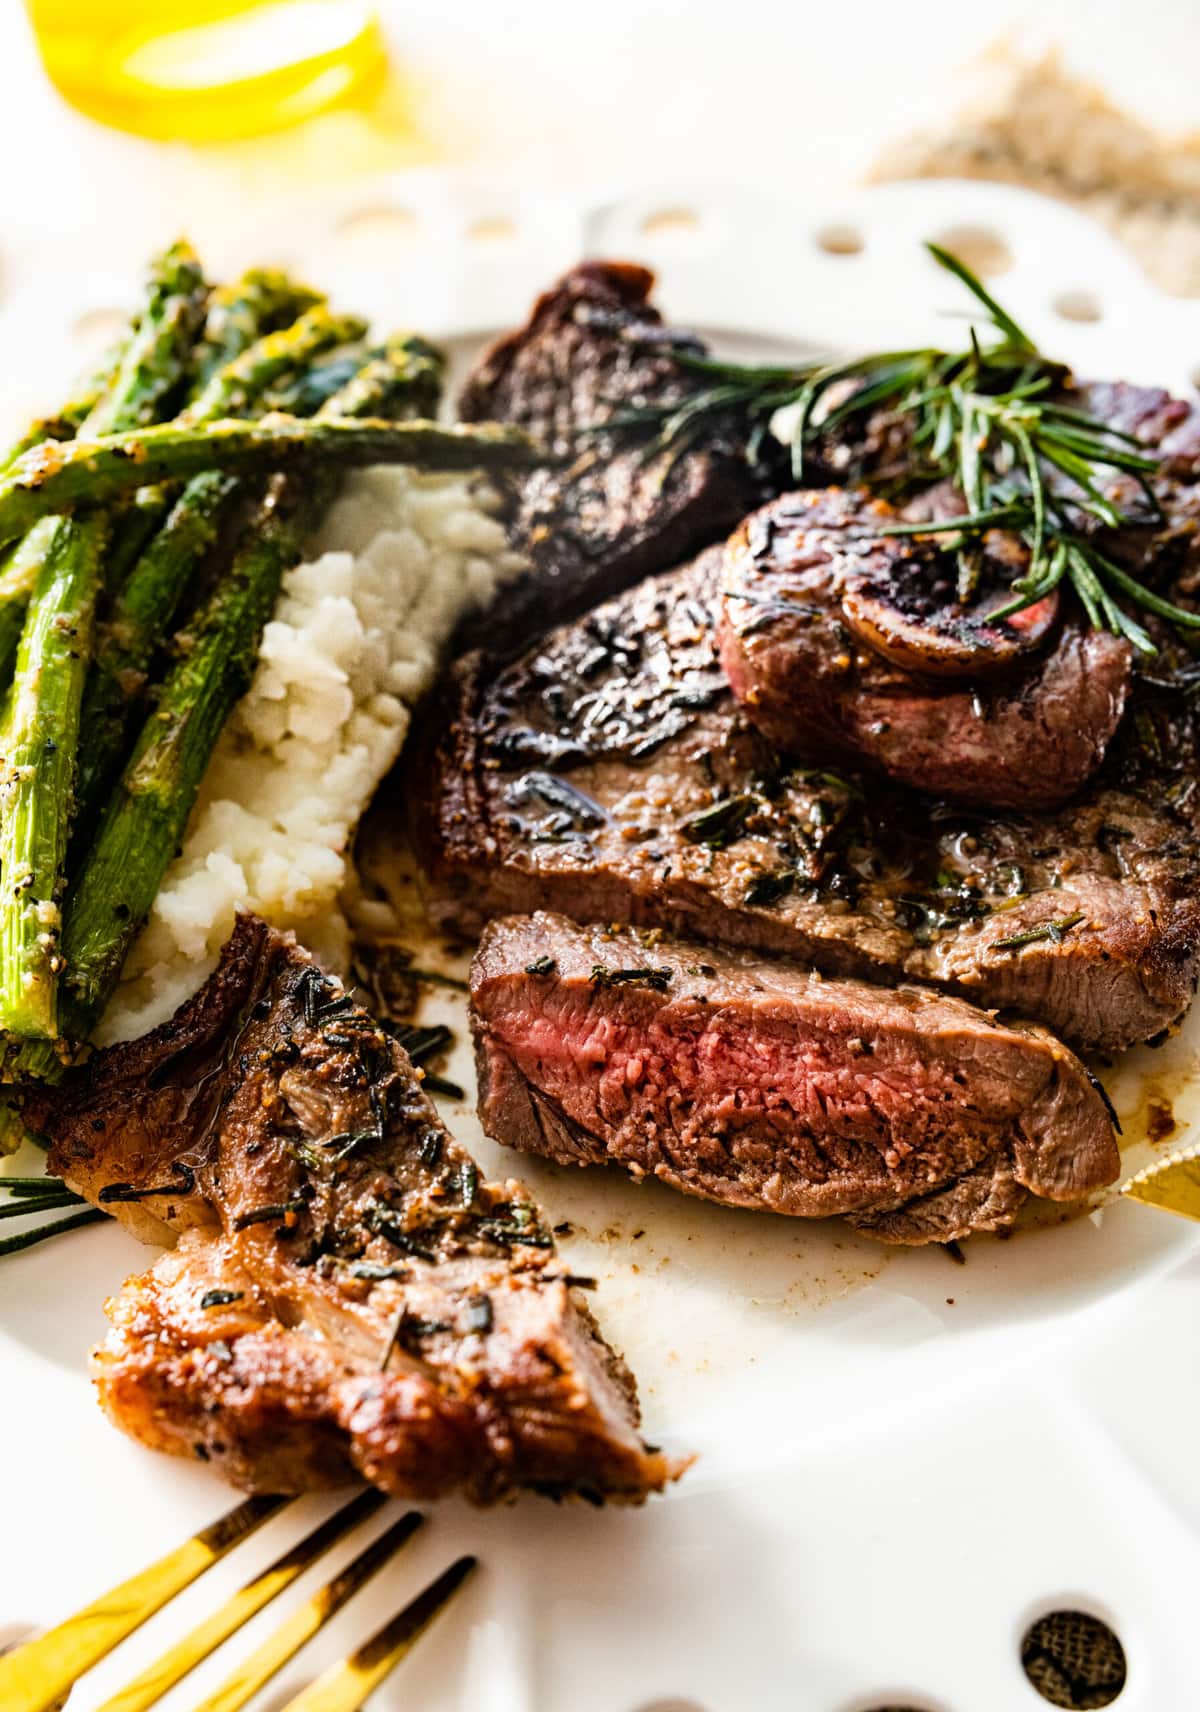 lamb steak on a plate with asparagus. Sliced meat on plate.